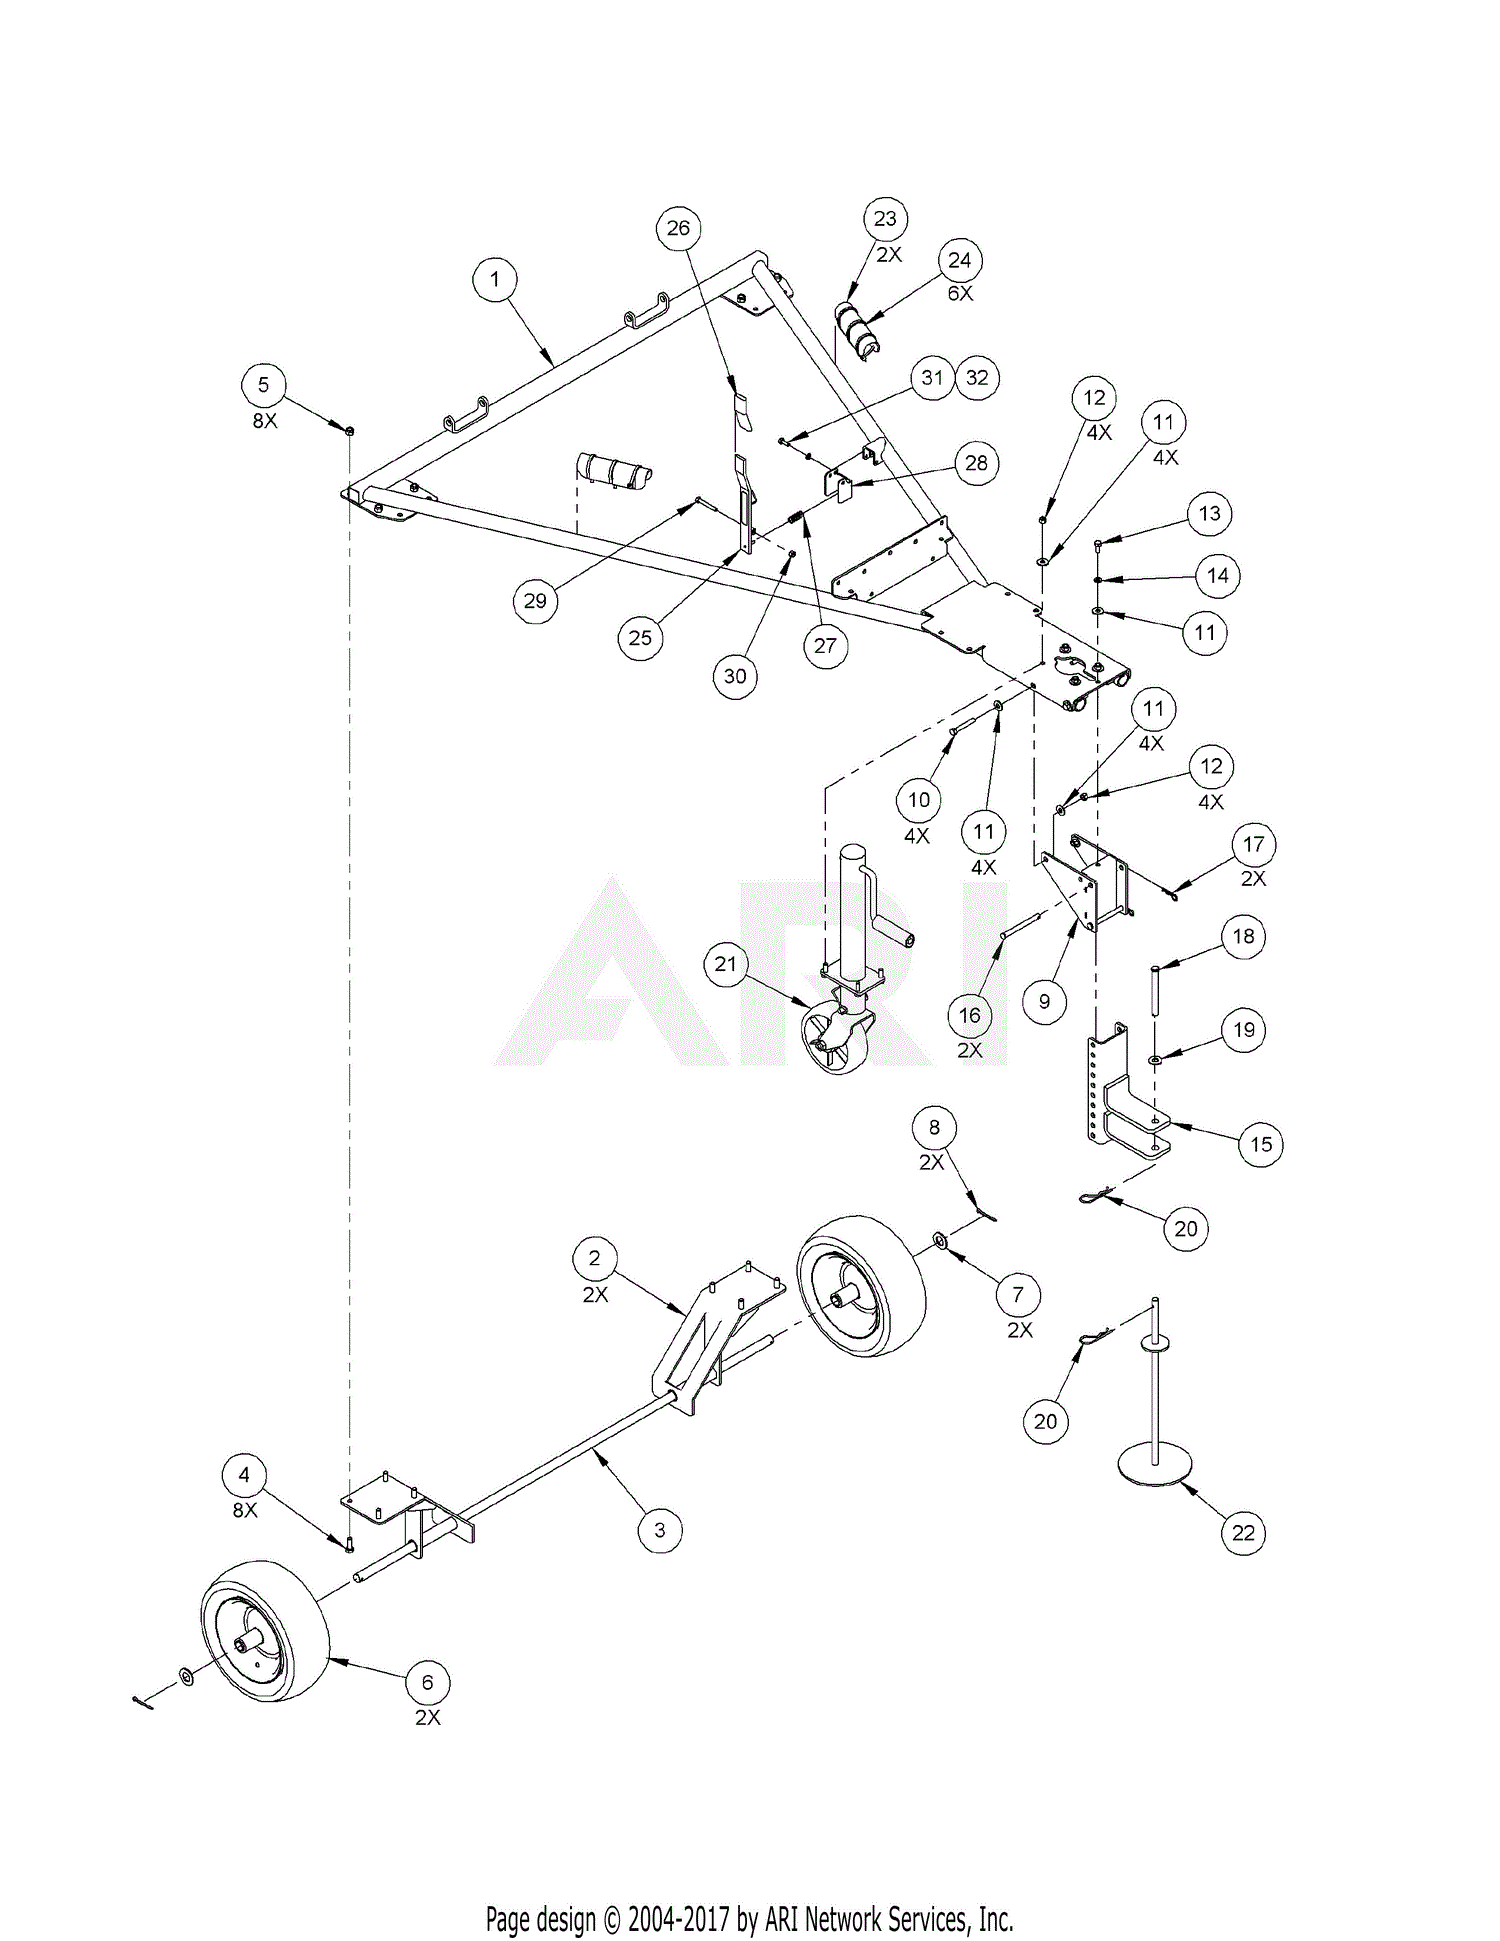 DR Power Lawn Vacuum Parts Diagram for LL1_Frame